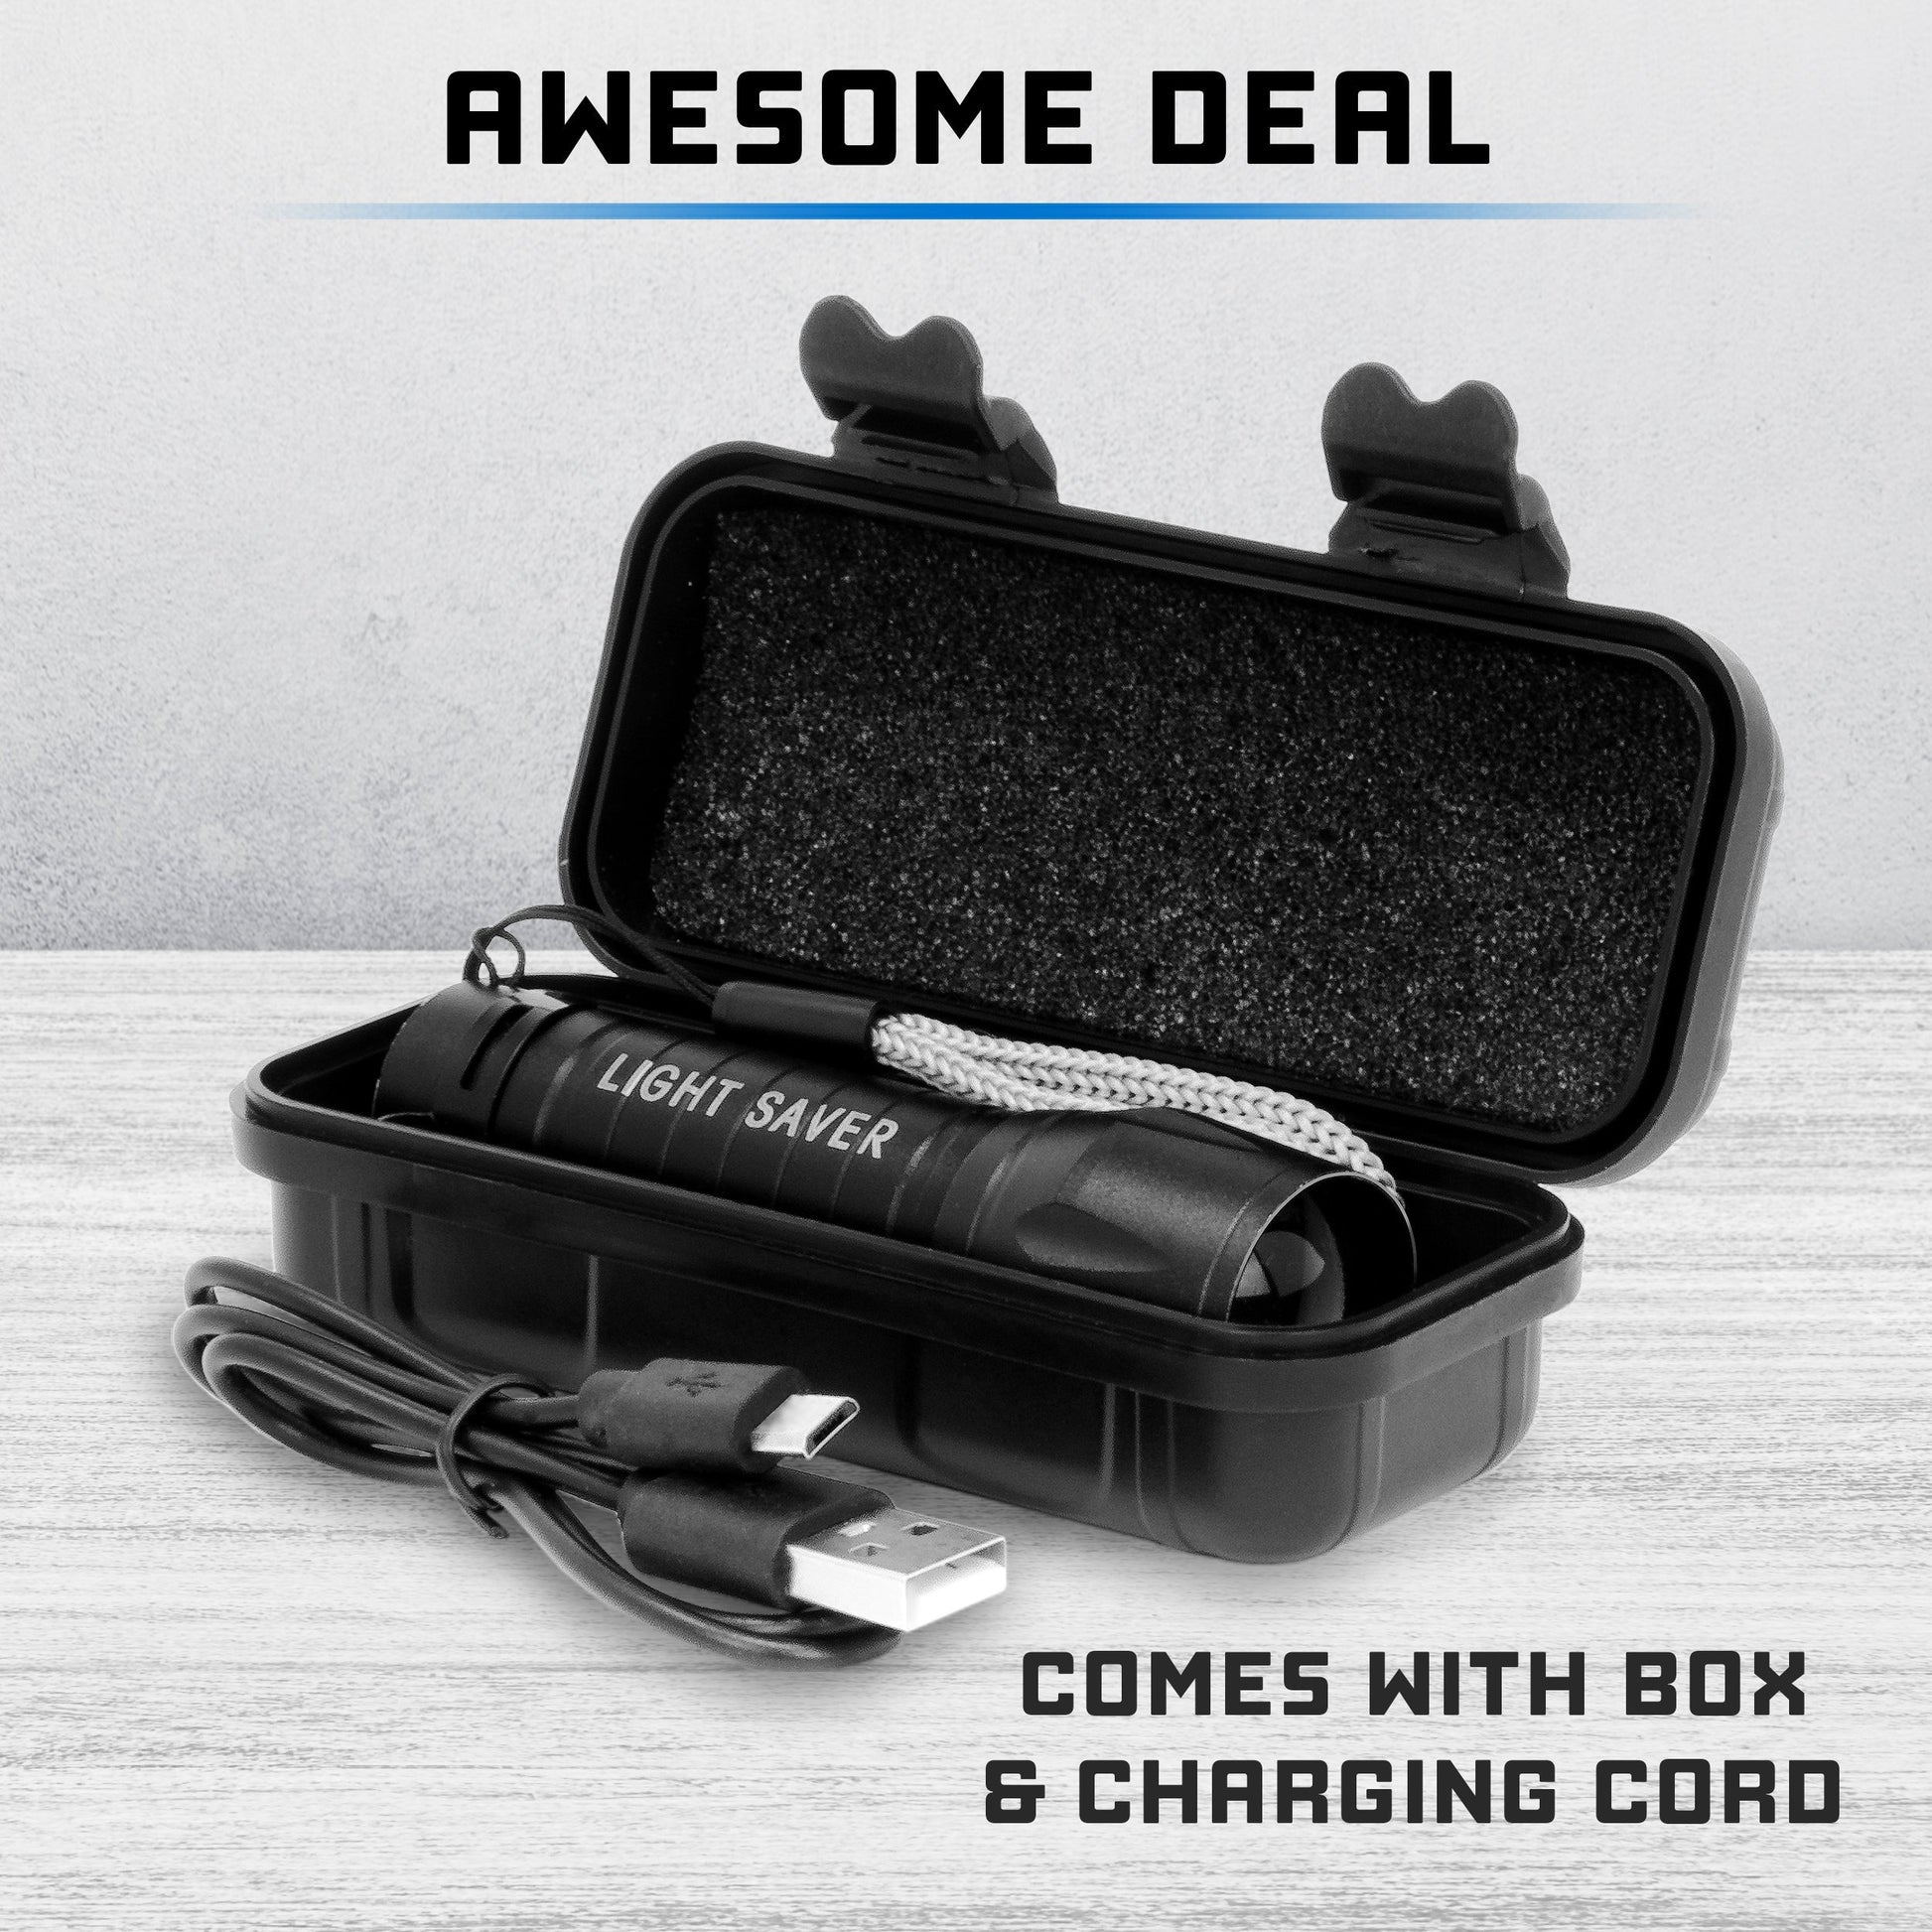 Awesome deal. Comes with a box and charging cord.